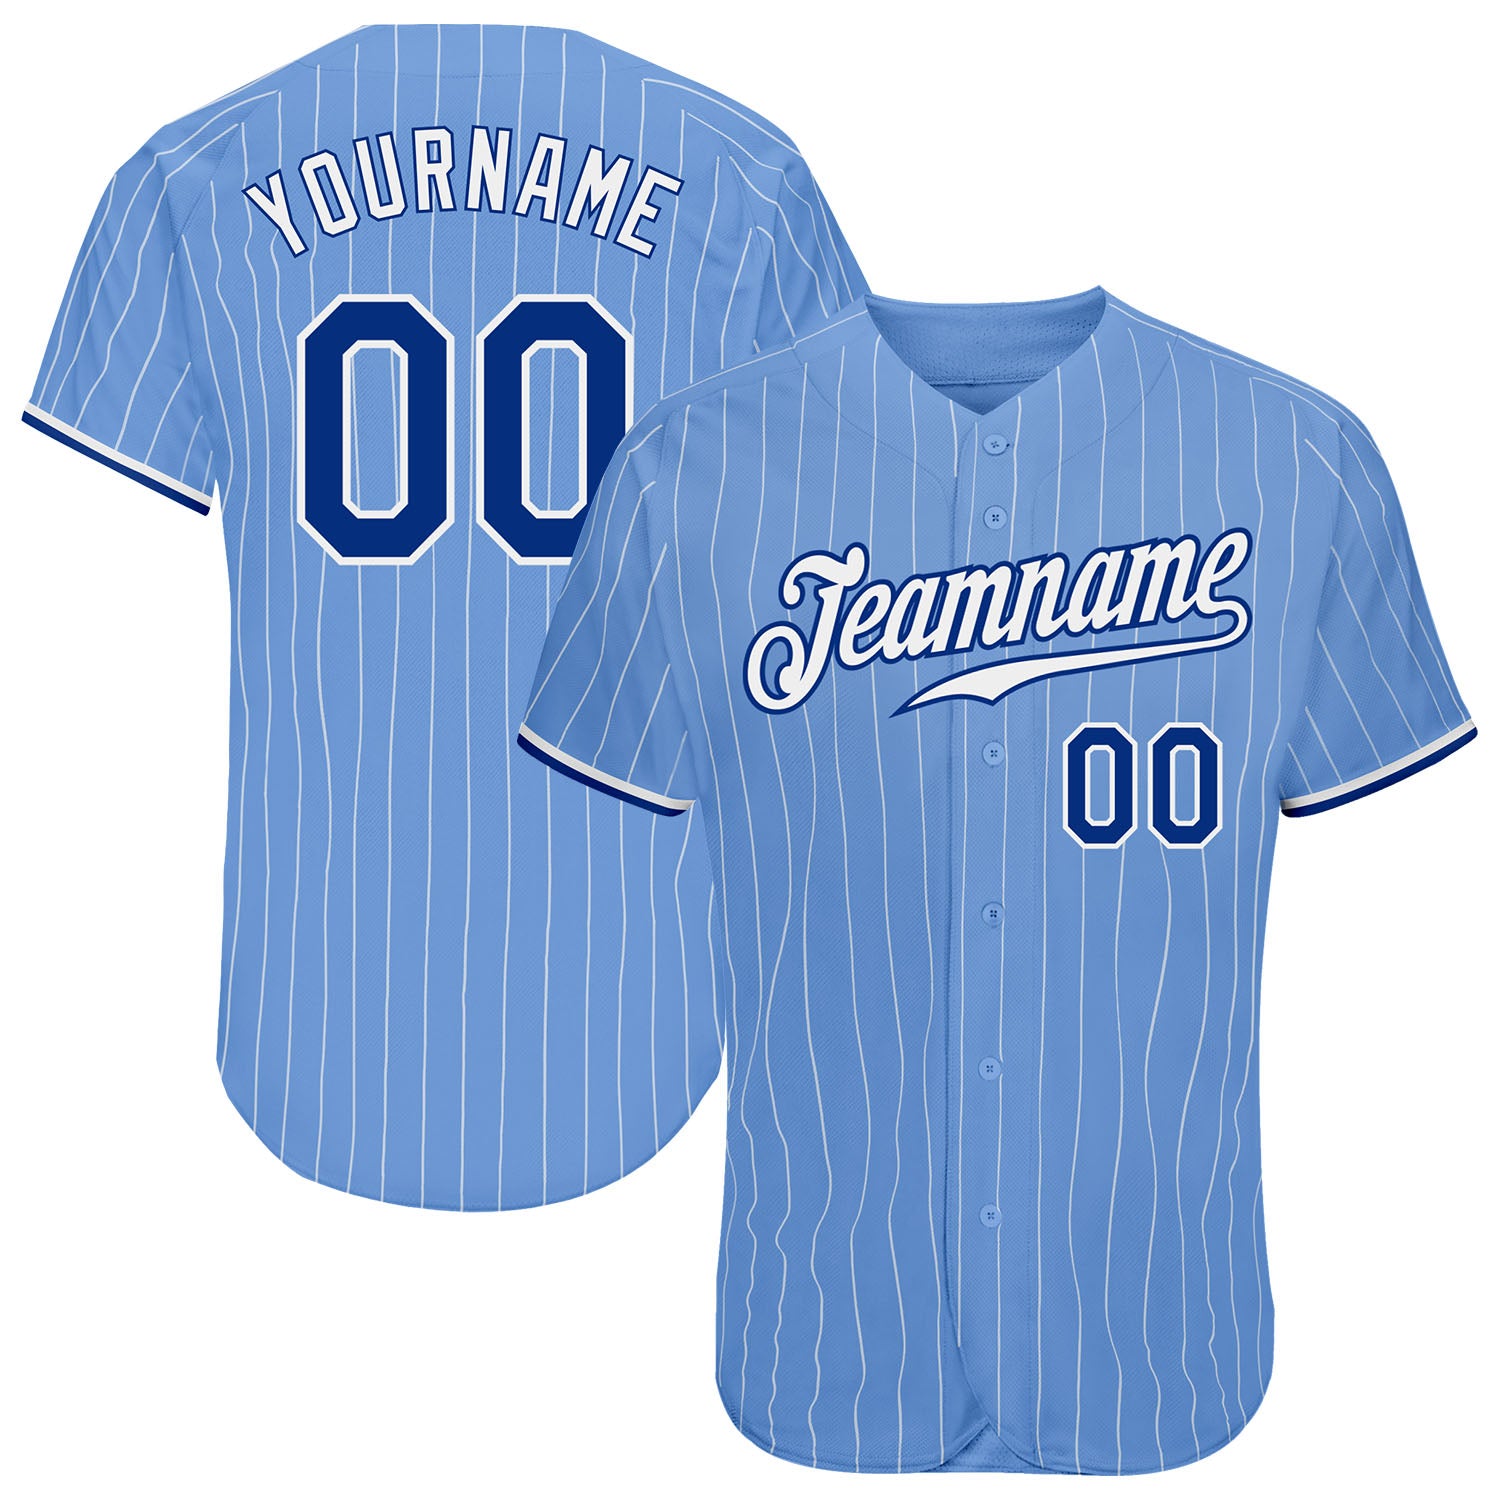 Royals Womens Personalized Light Blue Jersey